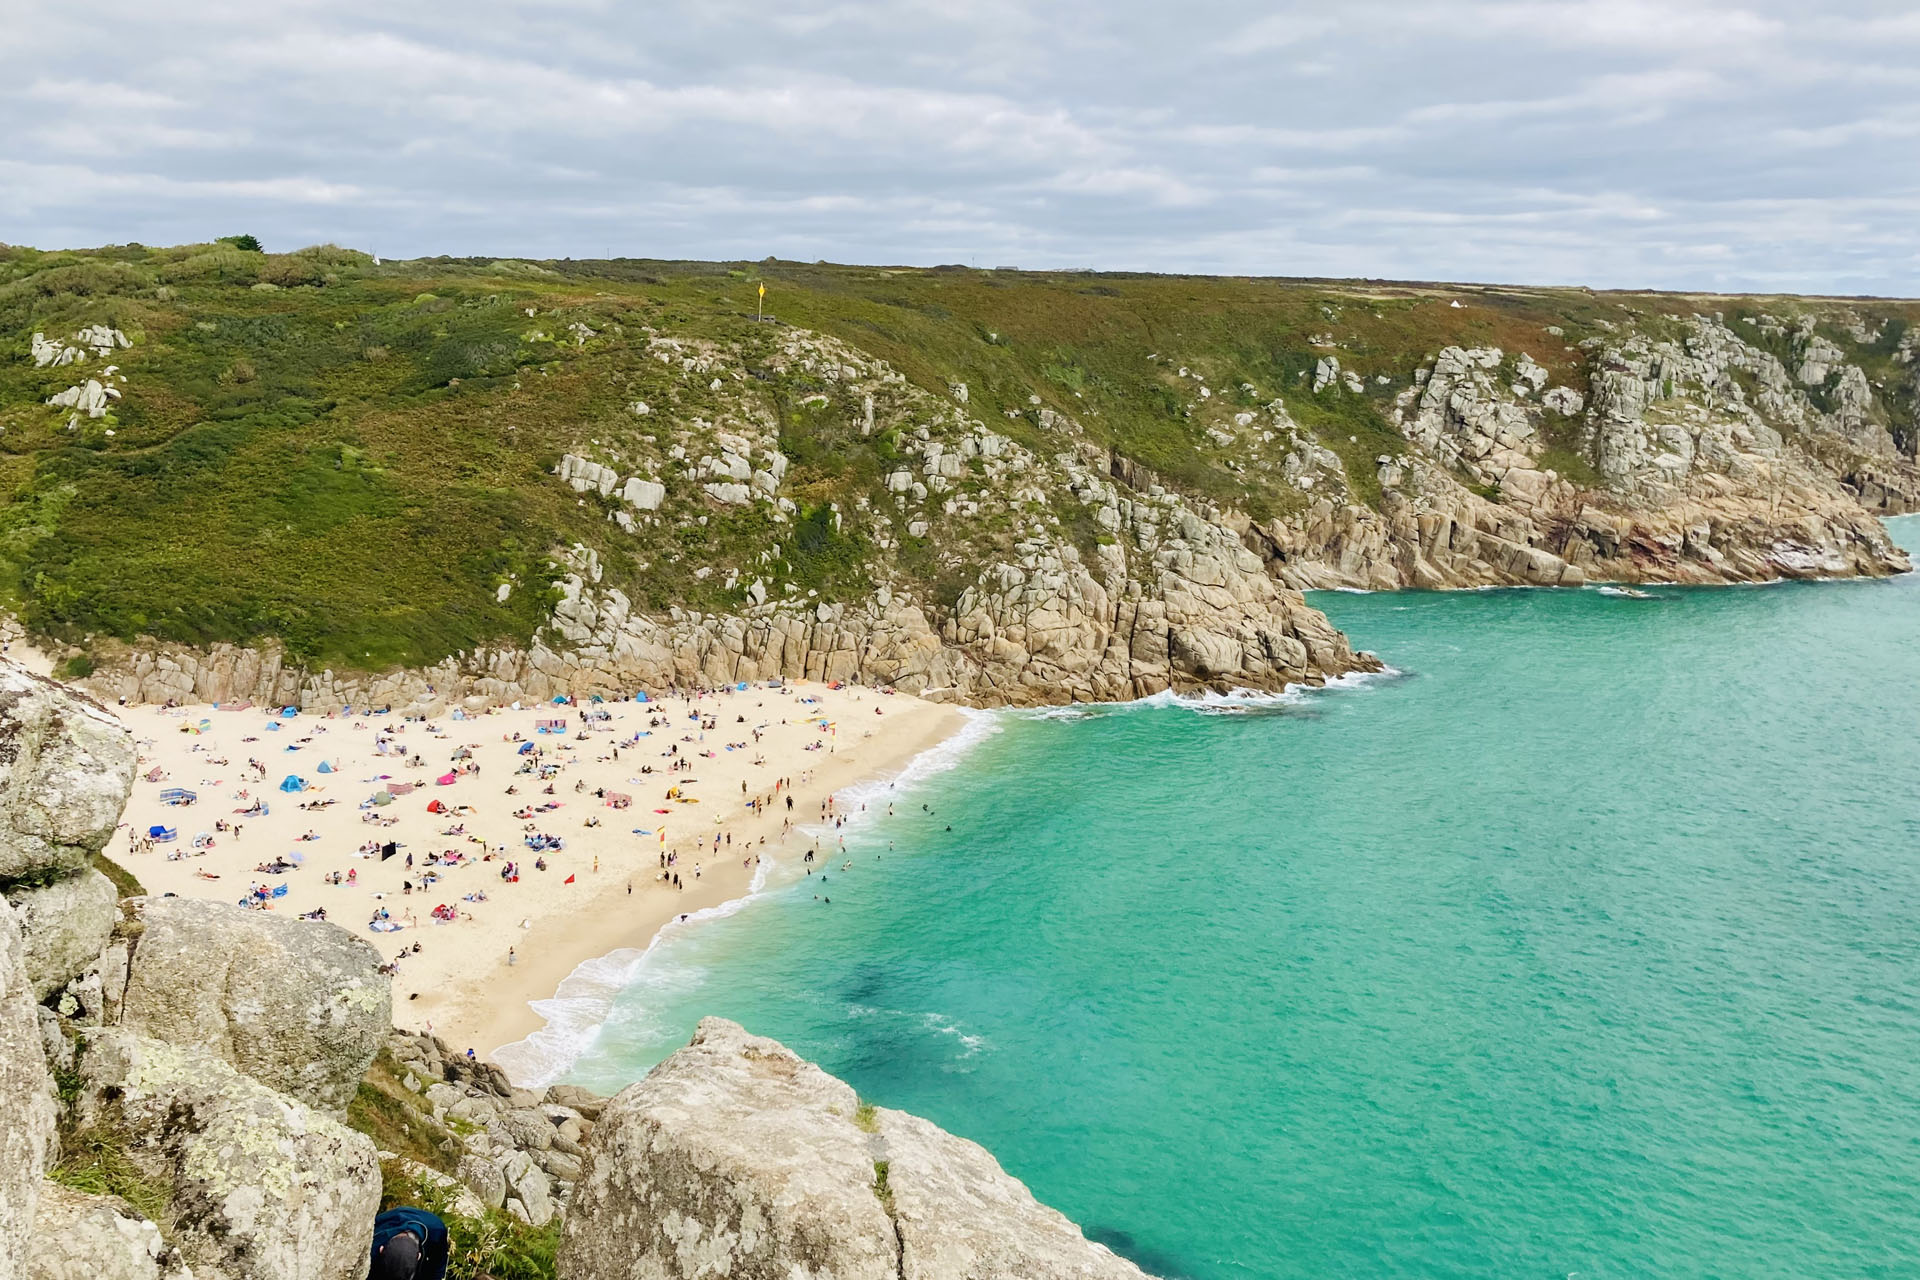 Exceptionally beautiful beach on a turquoise bay backed by granite cliffs. Special views of an aquamarine sea and white shell beach on a gentle circular walk with beautiful views and interesting flora and fauna.